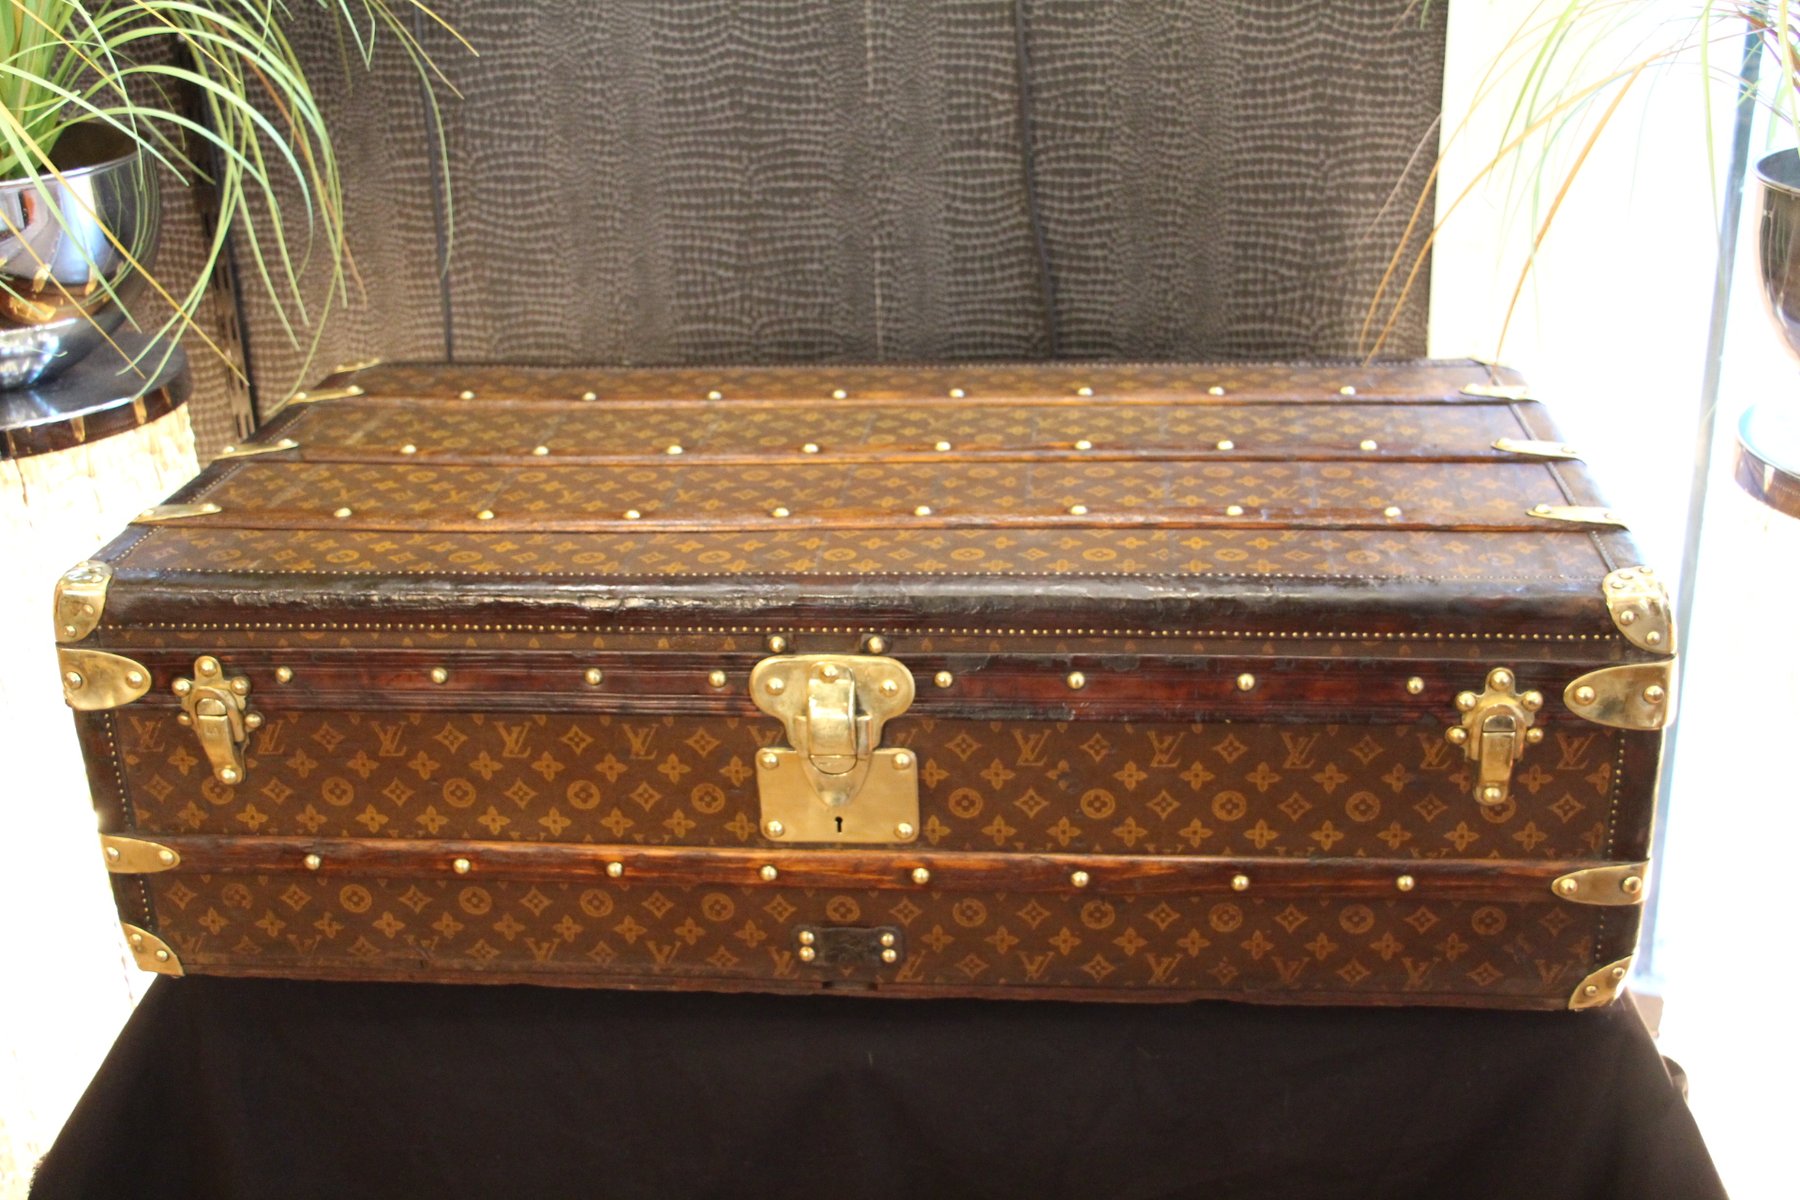 First Edition Stenciled Monogram Canvas Steamer Trunk from Louis Vuitton, 1920s for sale at Pamono